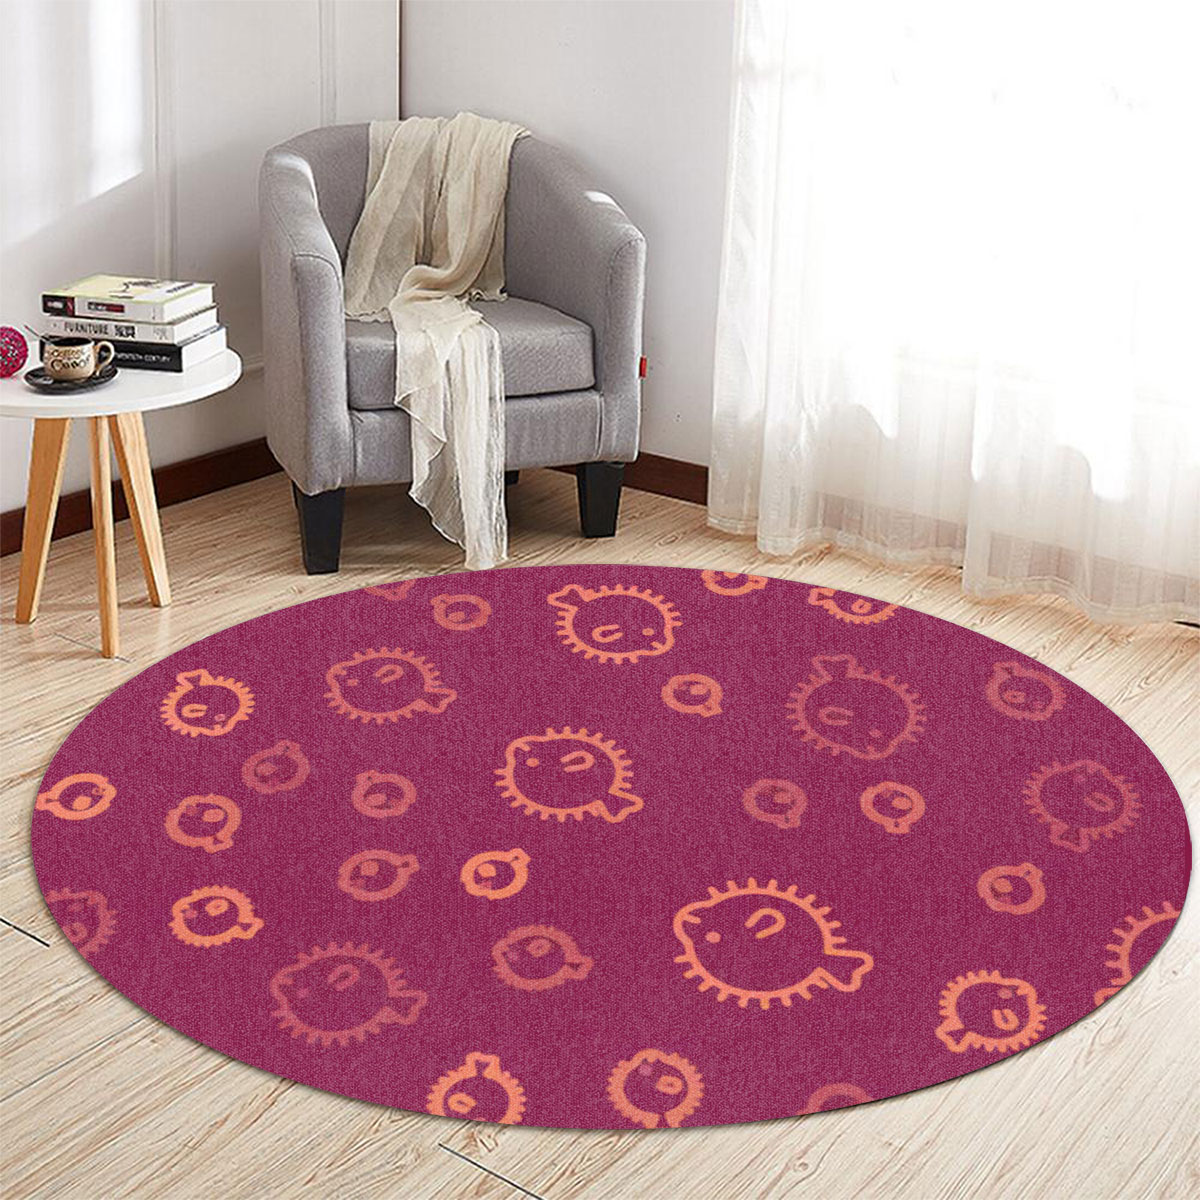 Funny Red Puffer Fish Round Carpet